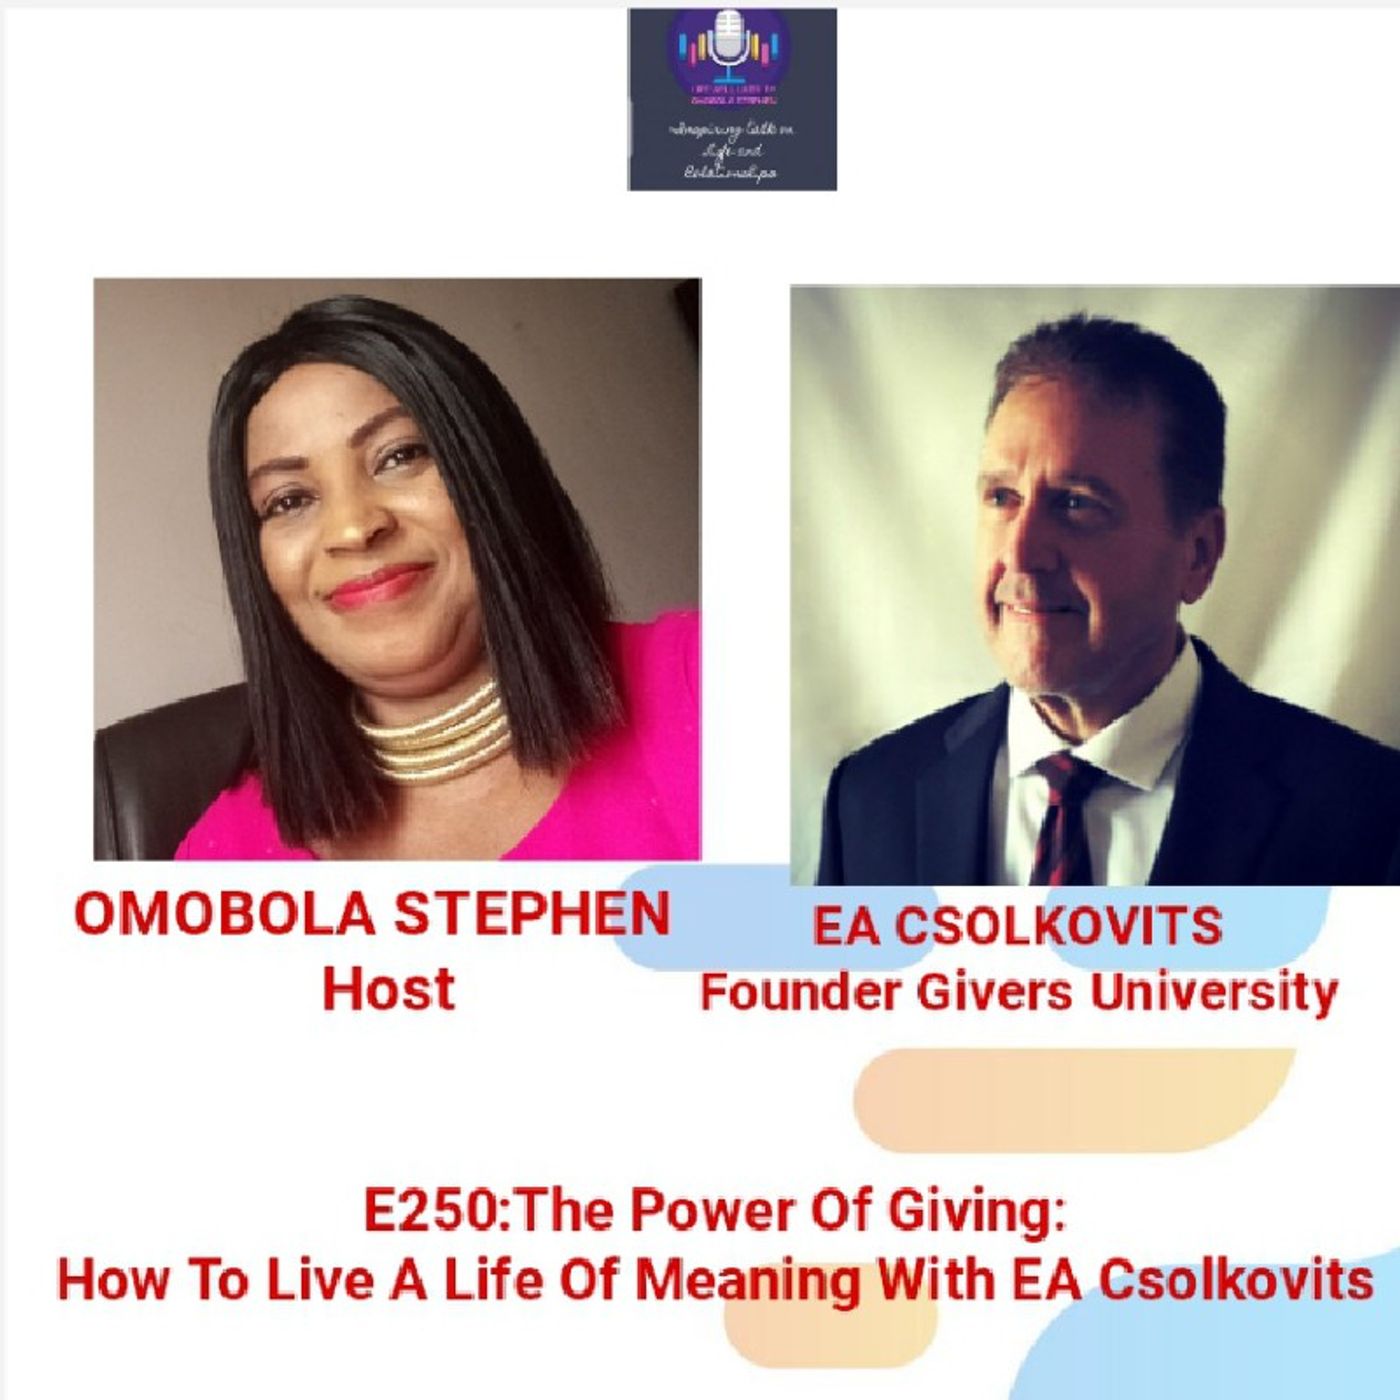 E250: The Power Of Giving:How To Live A Life Of Meaning With EA Csolkovits